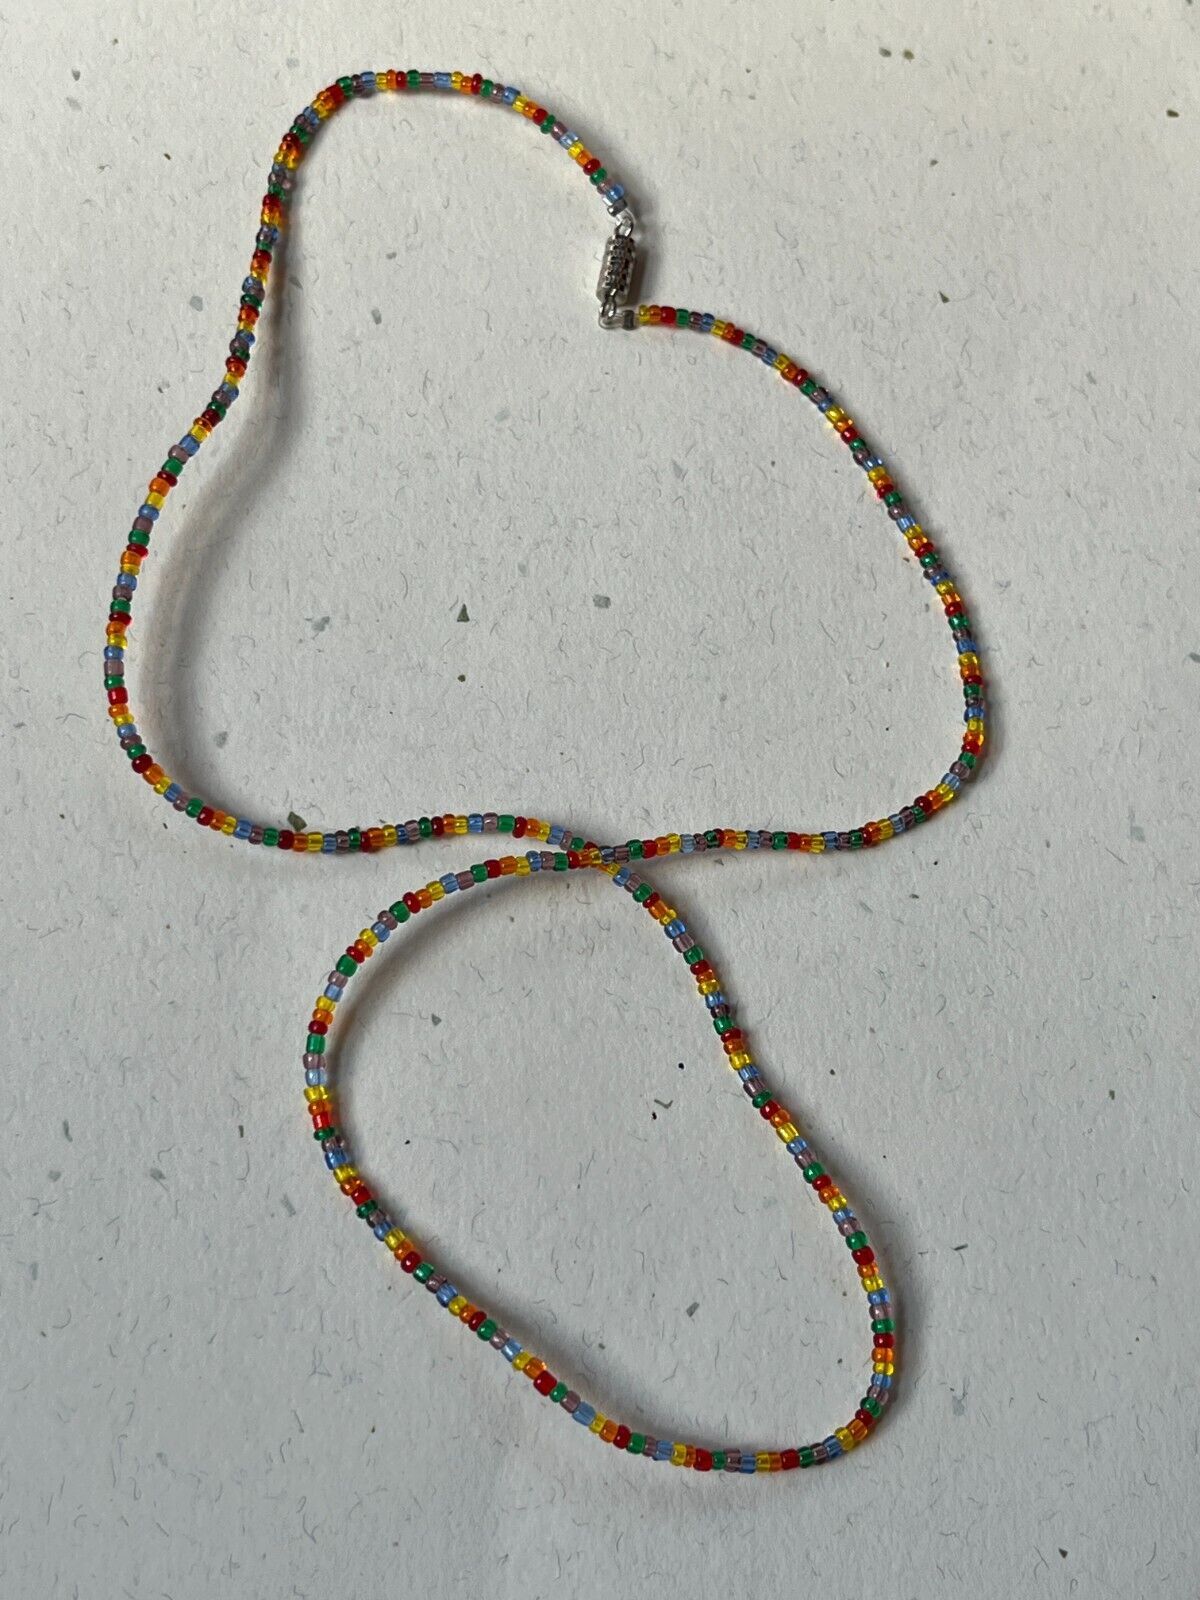 Primary image for Thin Tiny Rainbow Plastic Bead Necklace – 20.5 inches long x just under 1/8th’s